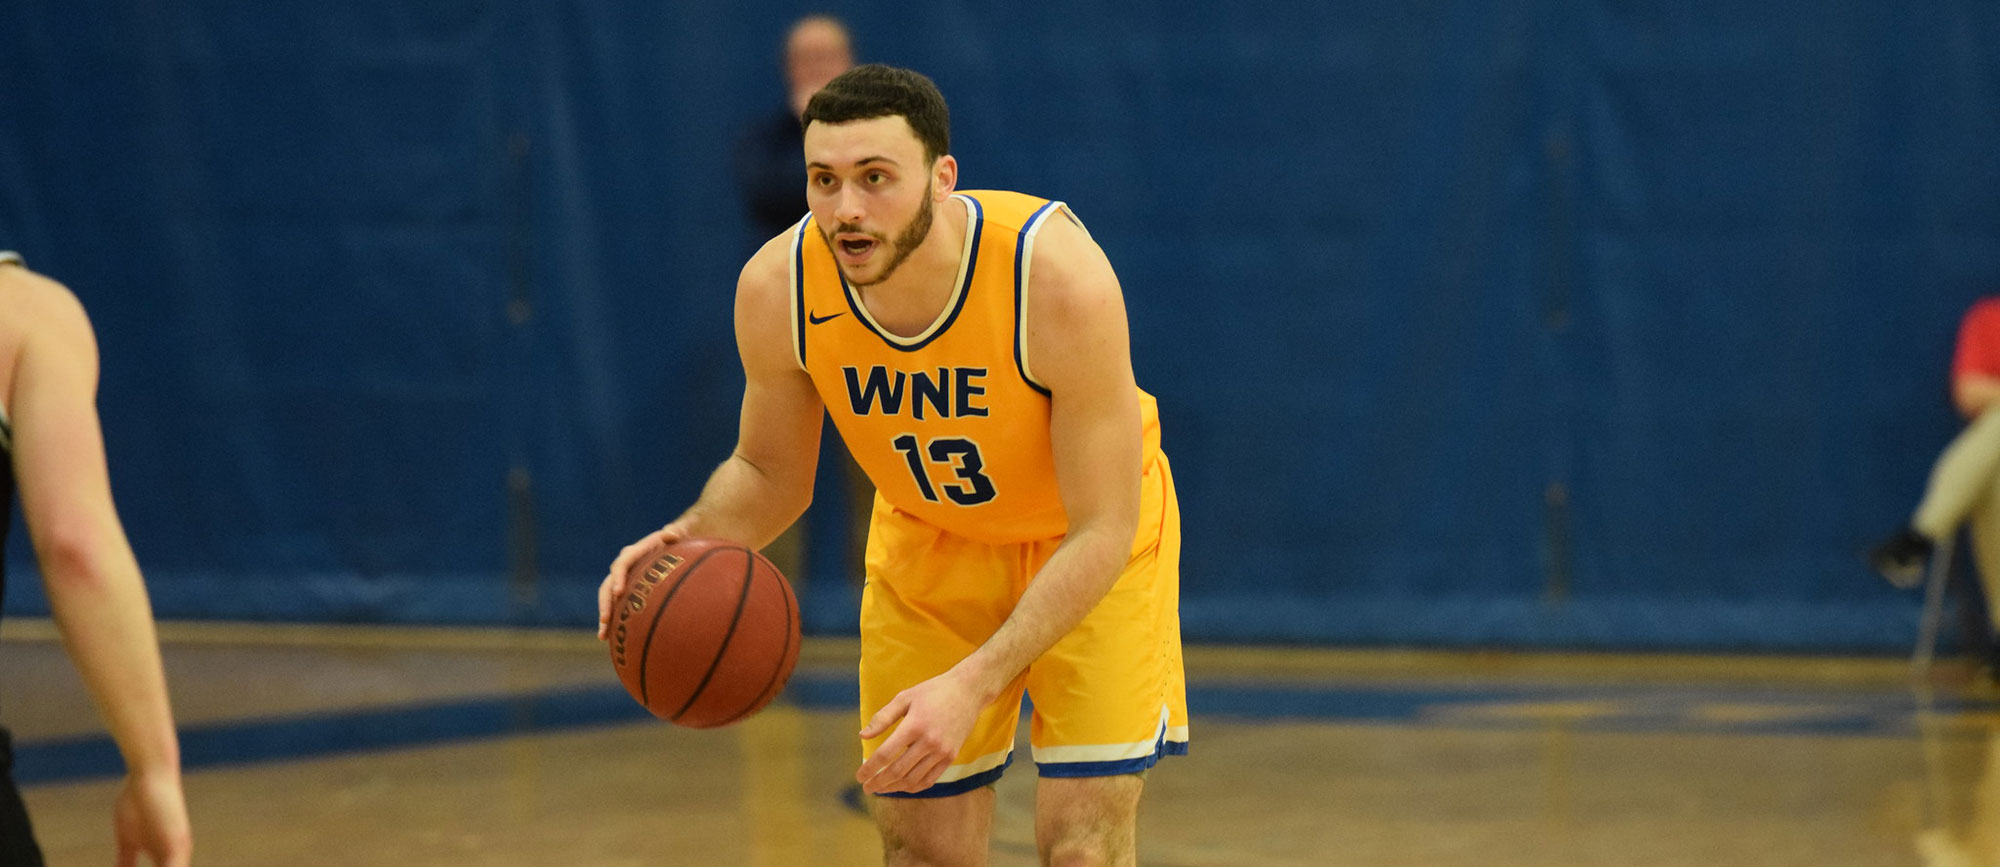 Alex Sikorski scored 17 points in an 83-72 loss to Roger Williams on Tuesday. (Photo by Rachael Margossian)